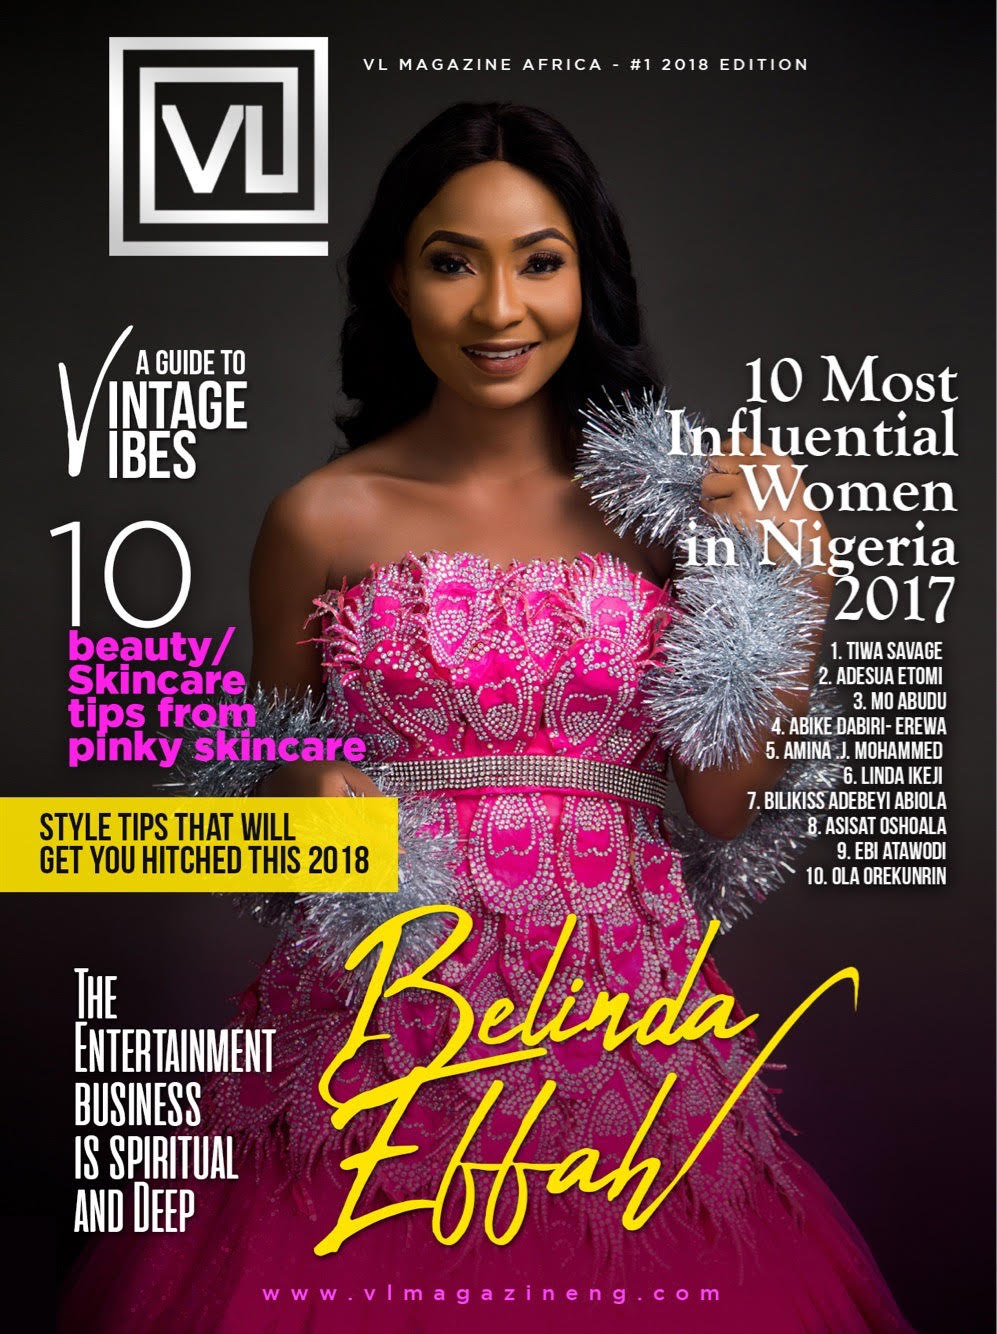 Belinda Effah stuns on the cover of VL Magazine's First Edition for ...